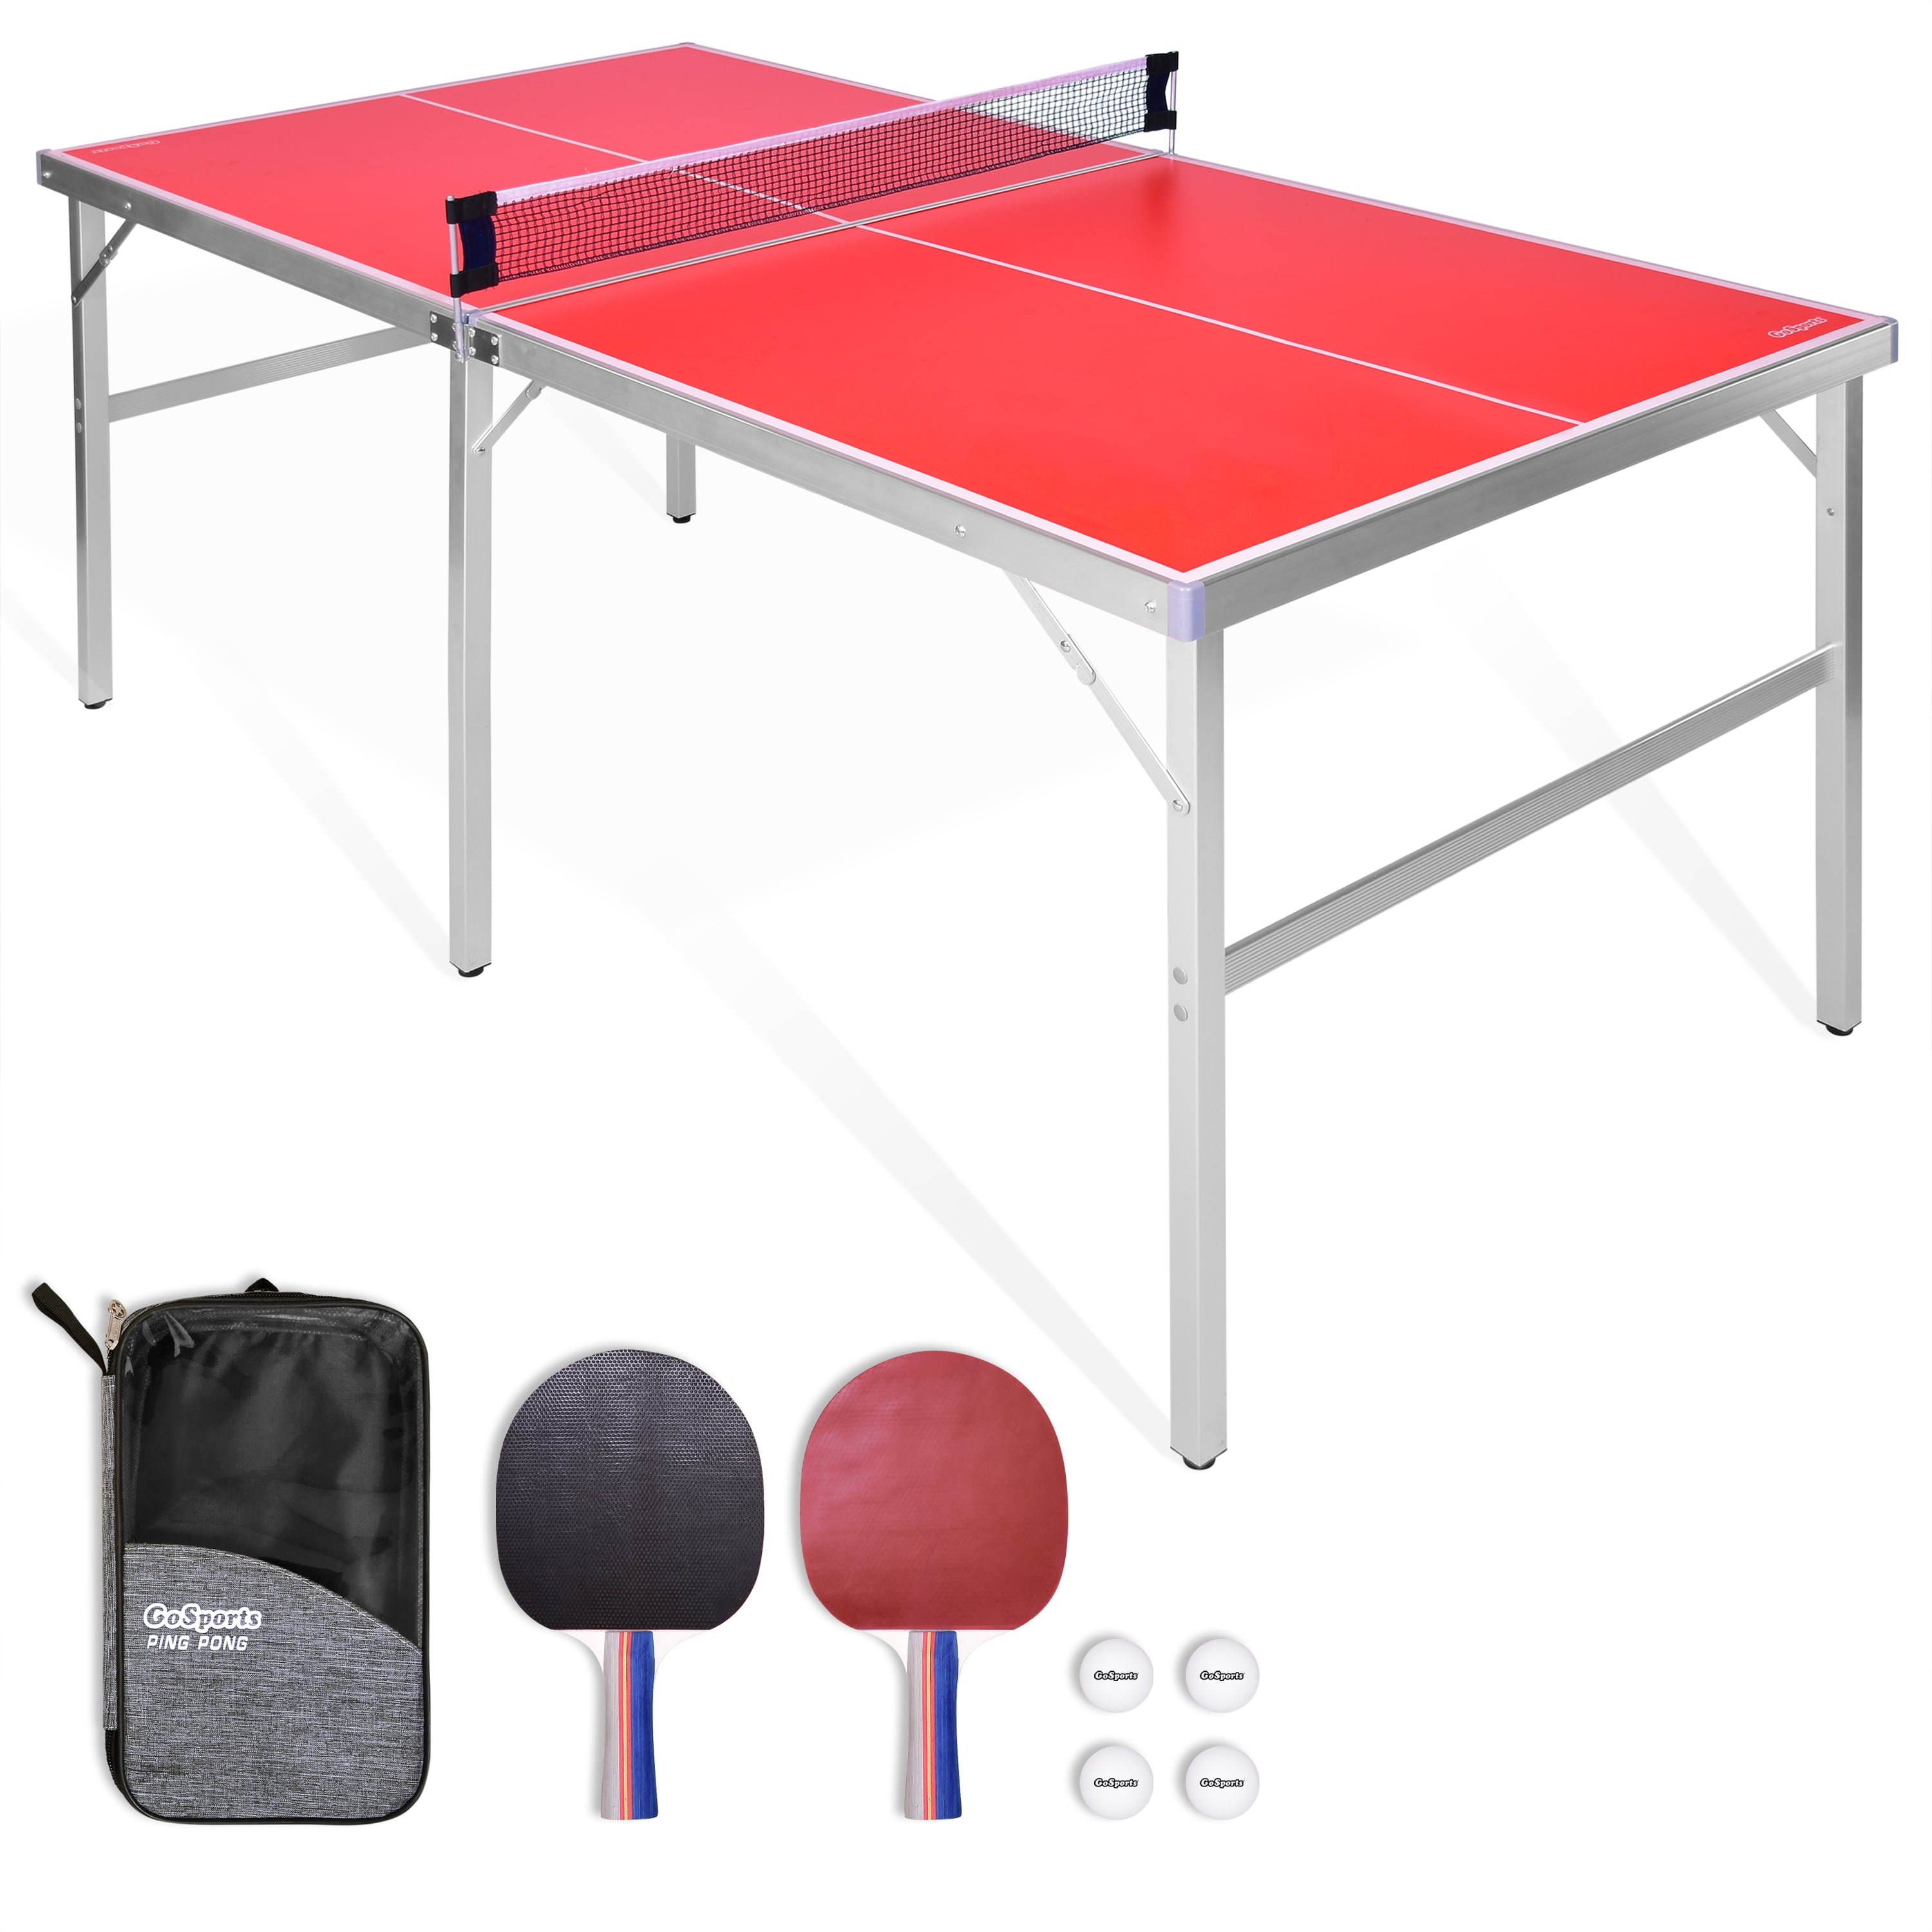 3 Balls and Bag@ 2 Paddles Net 7-Piece Table Tennis/Ping Pong Set Expandable 